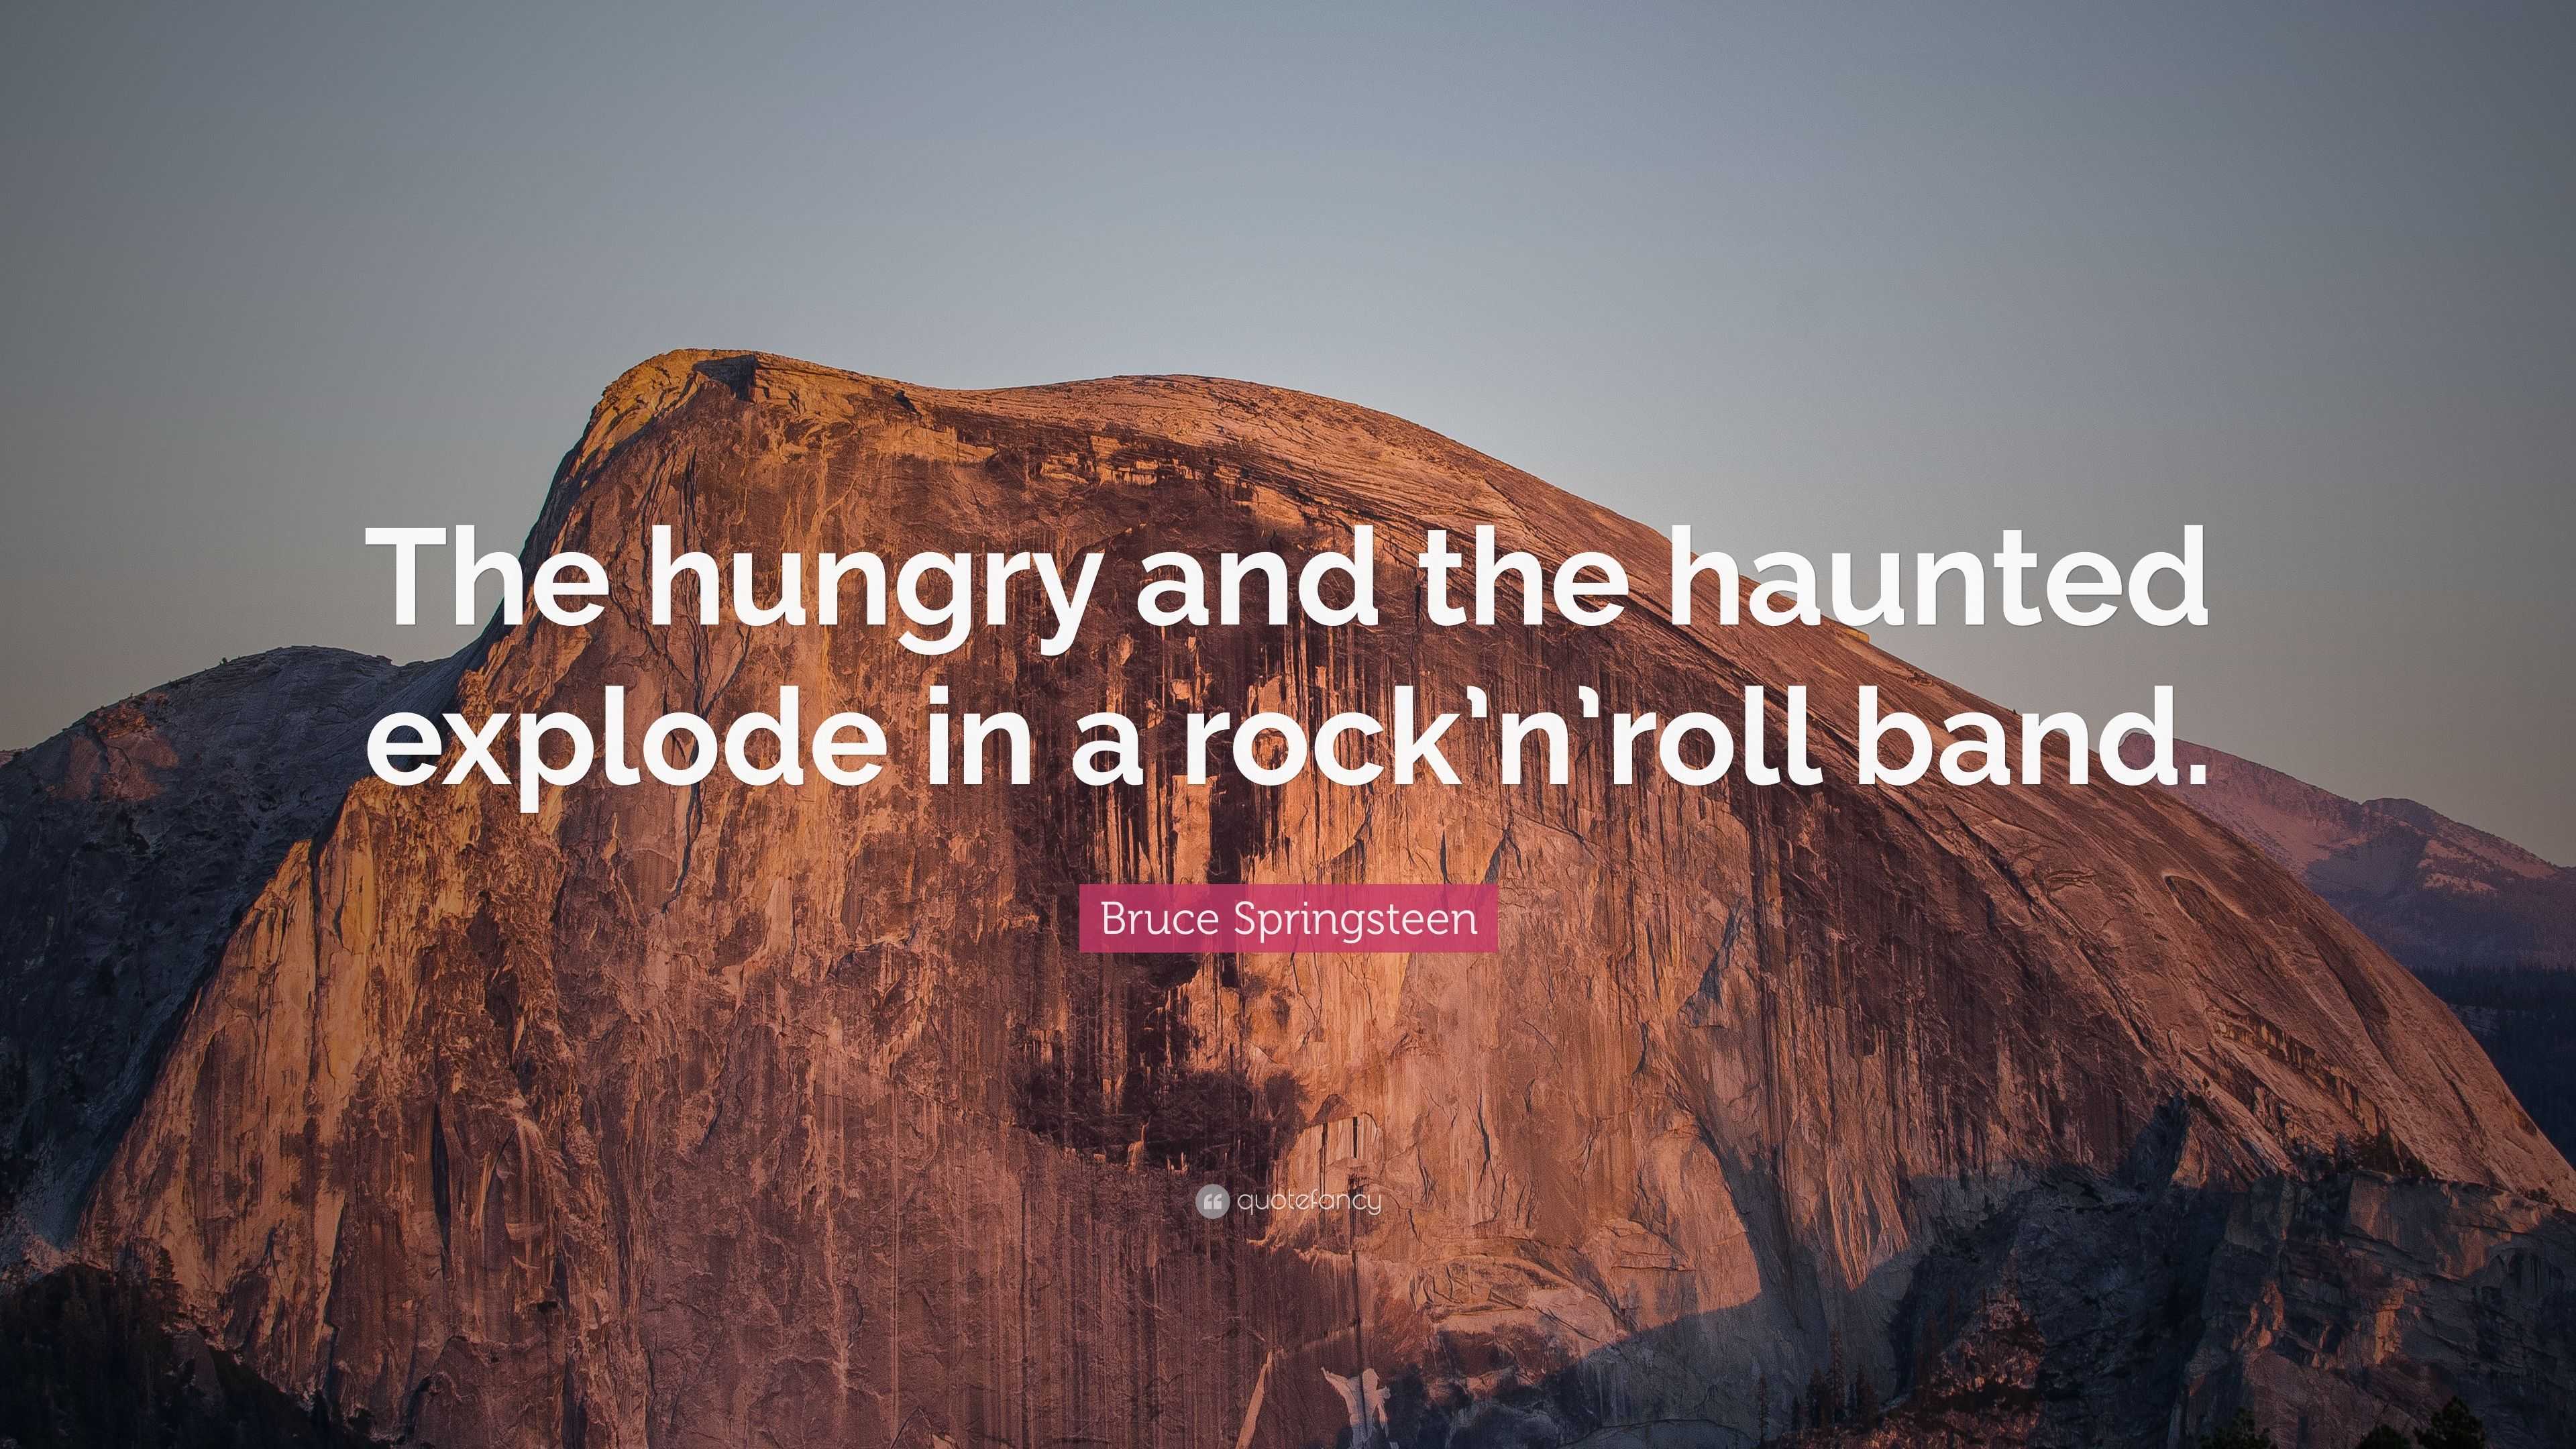 Haunted Rock and Roll